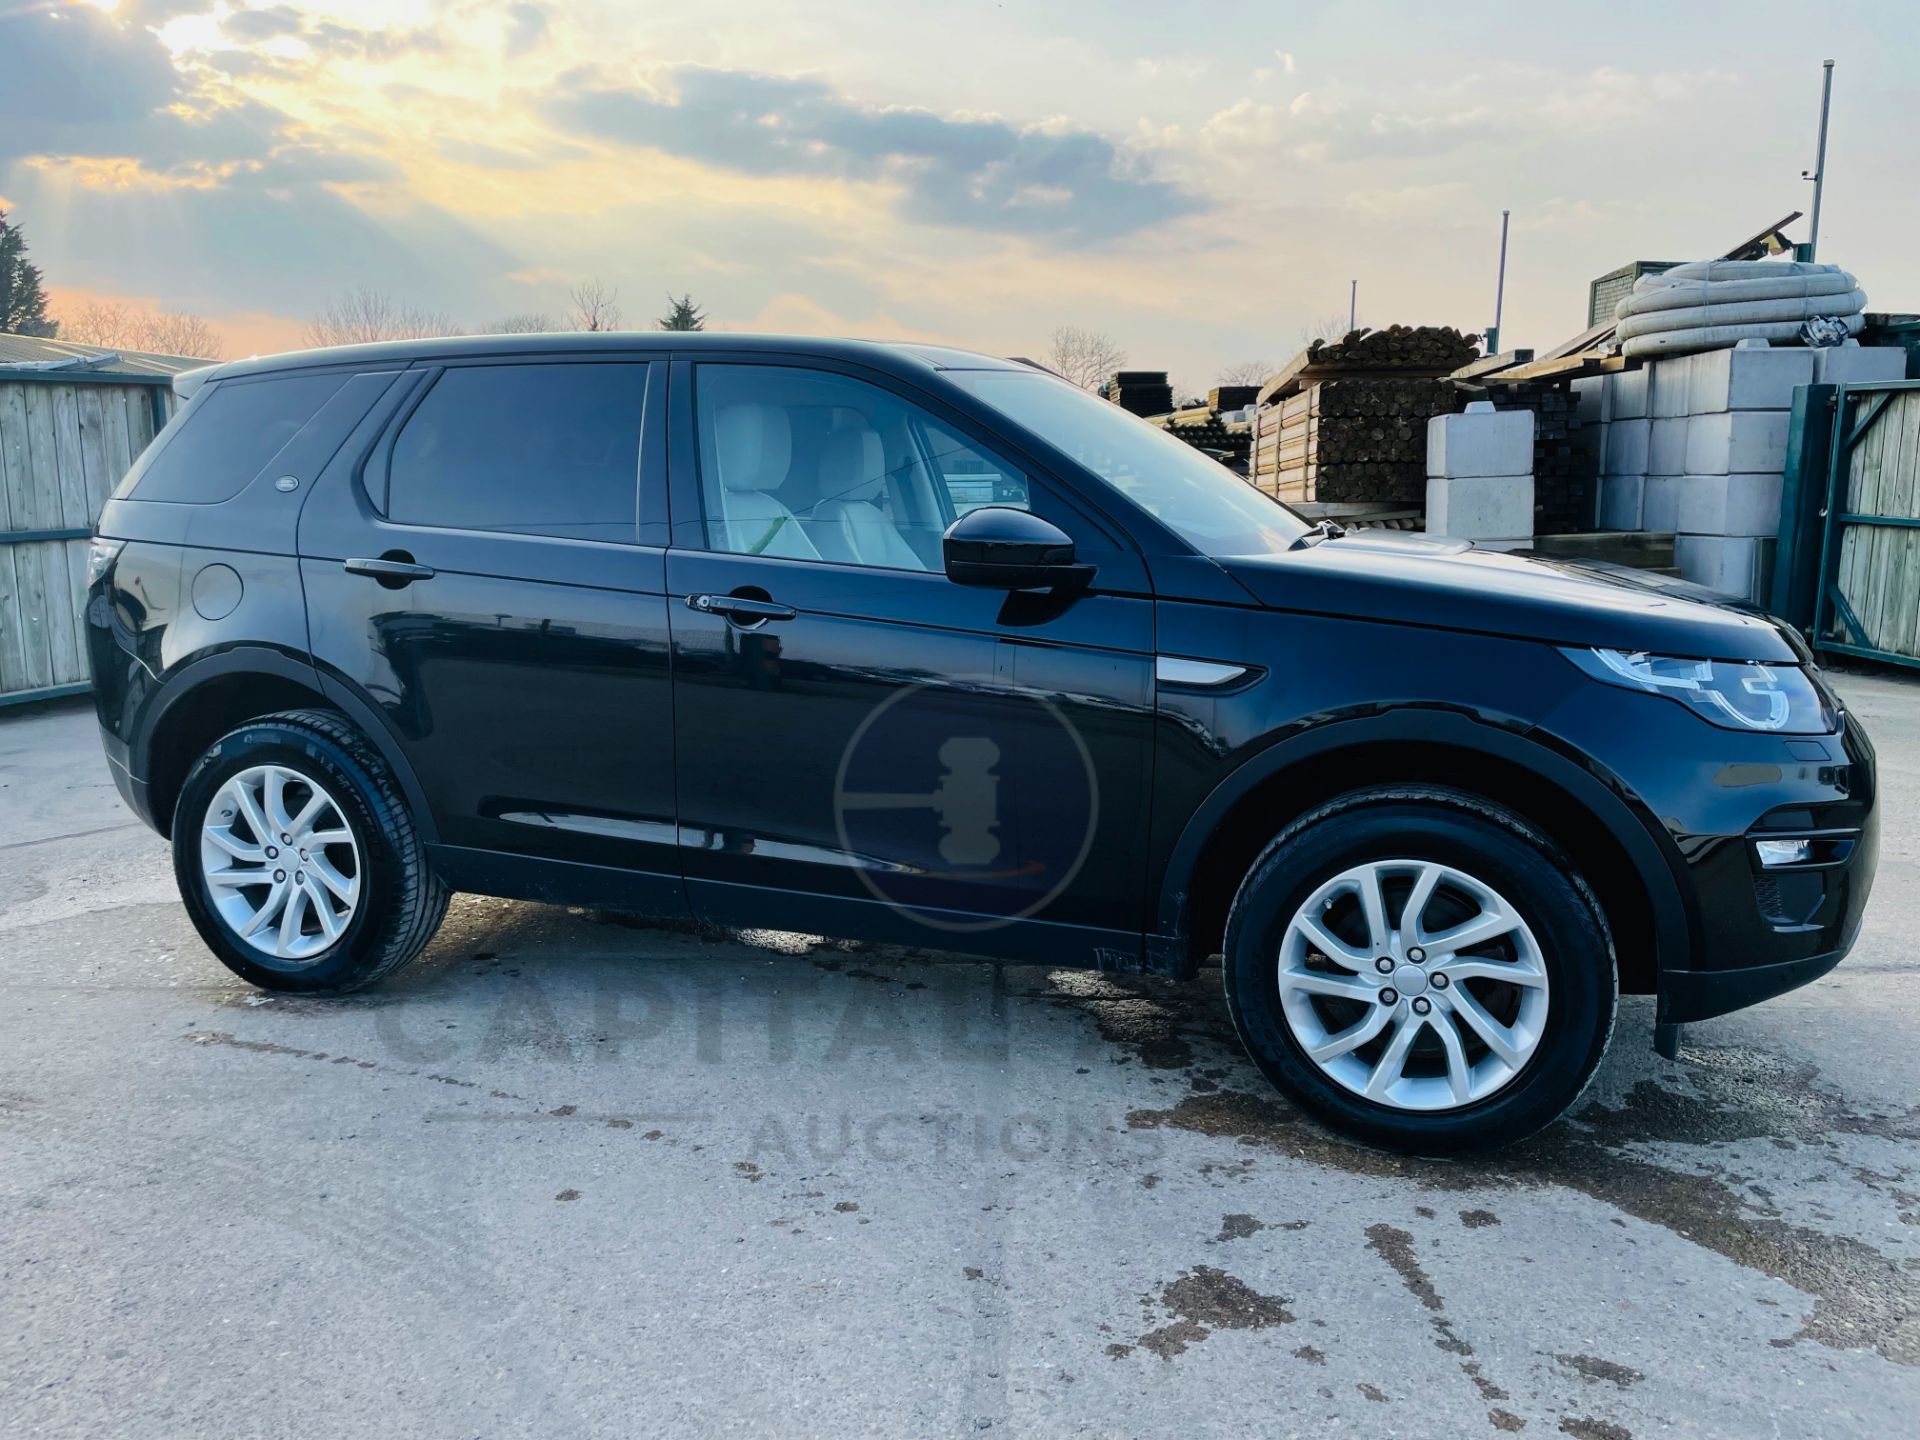 (On Sale) LAND ROVER DISCOVERY SPORT *SE TECH* 7 SEATER SUV (2018 - EURO 6) TD4 - AUTO *LOW MILEAGE*